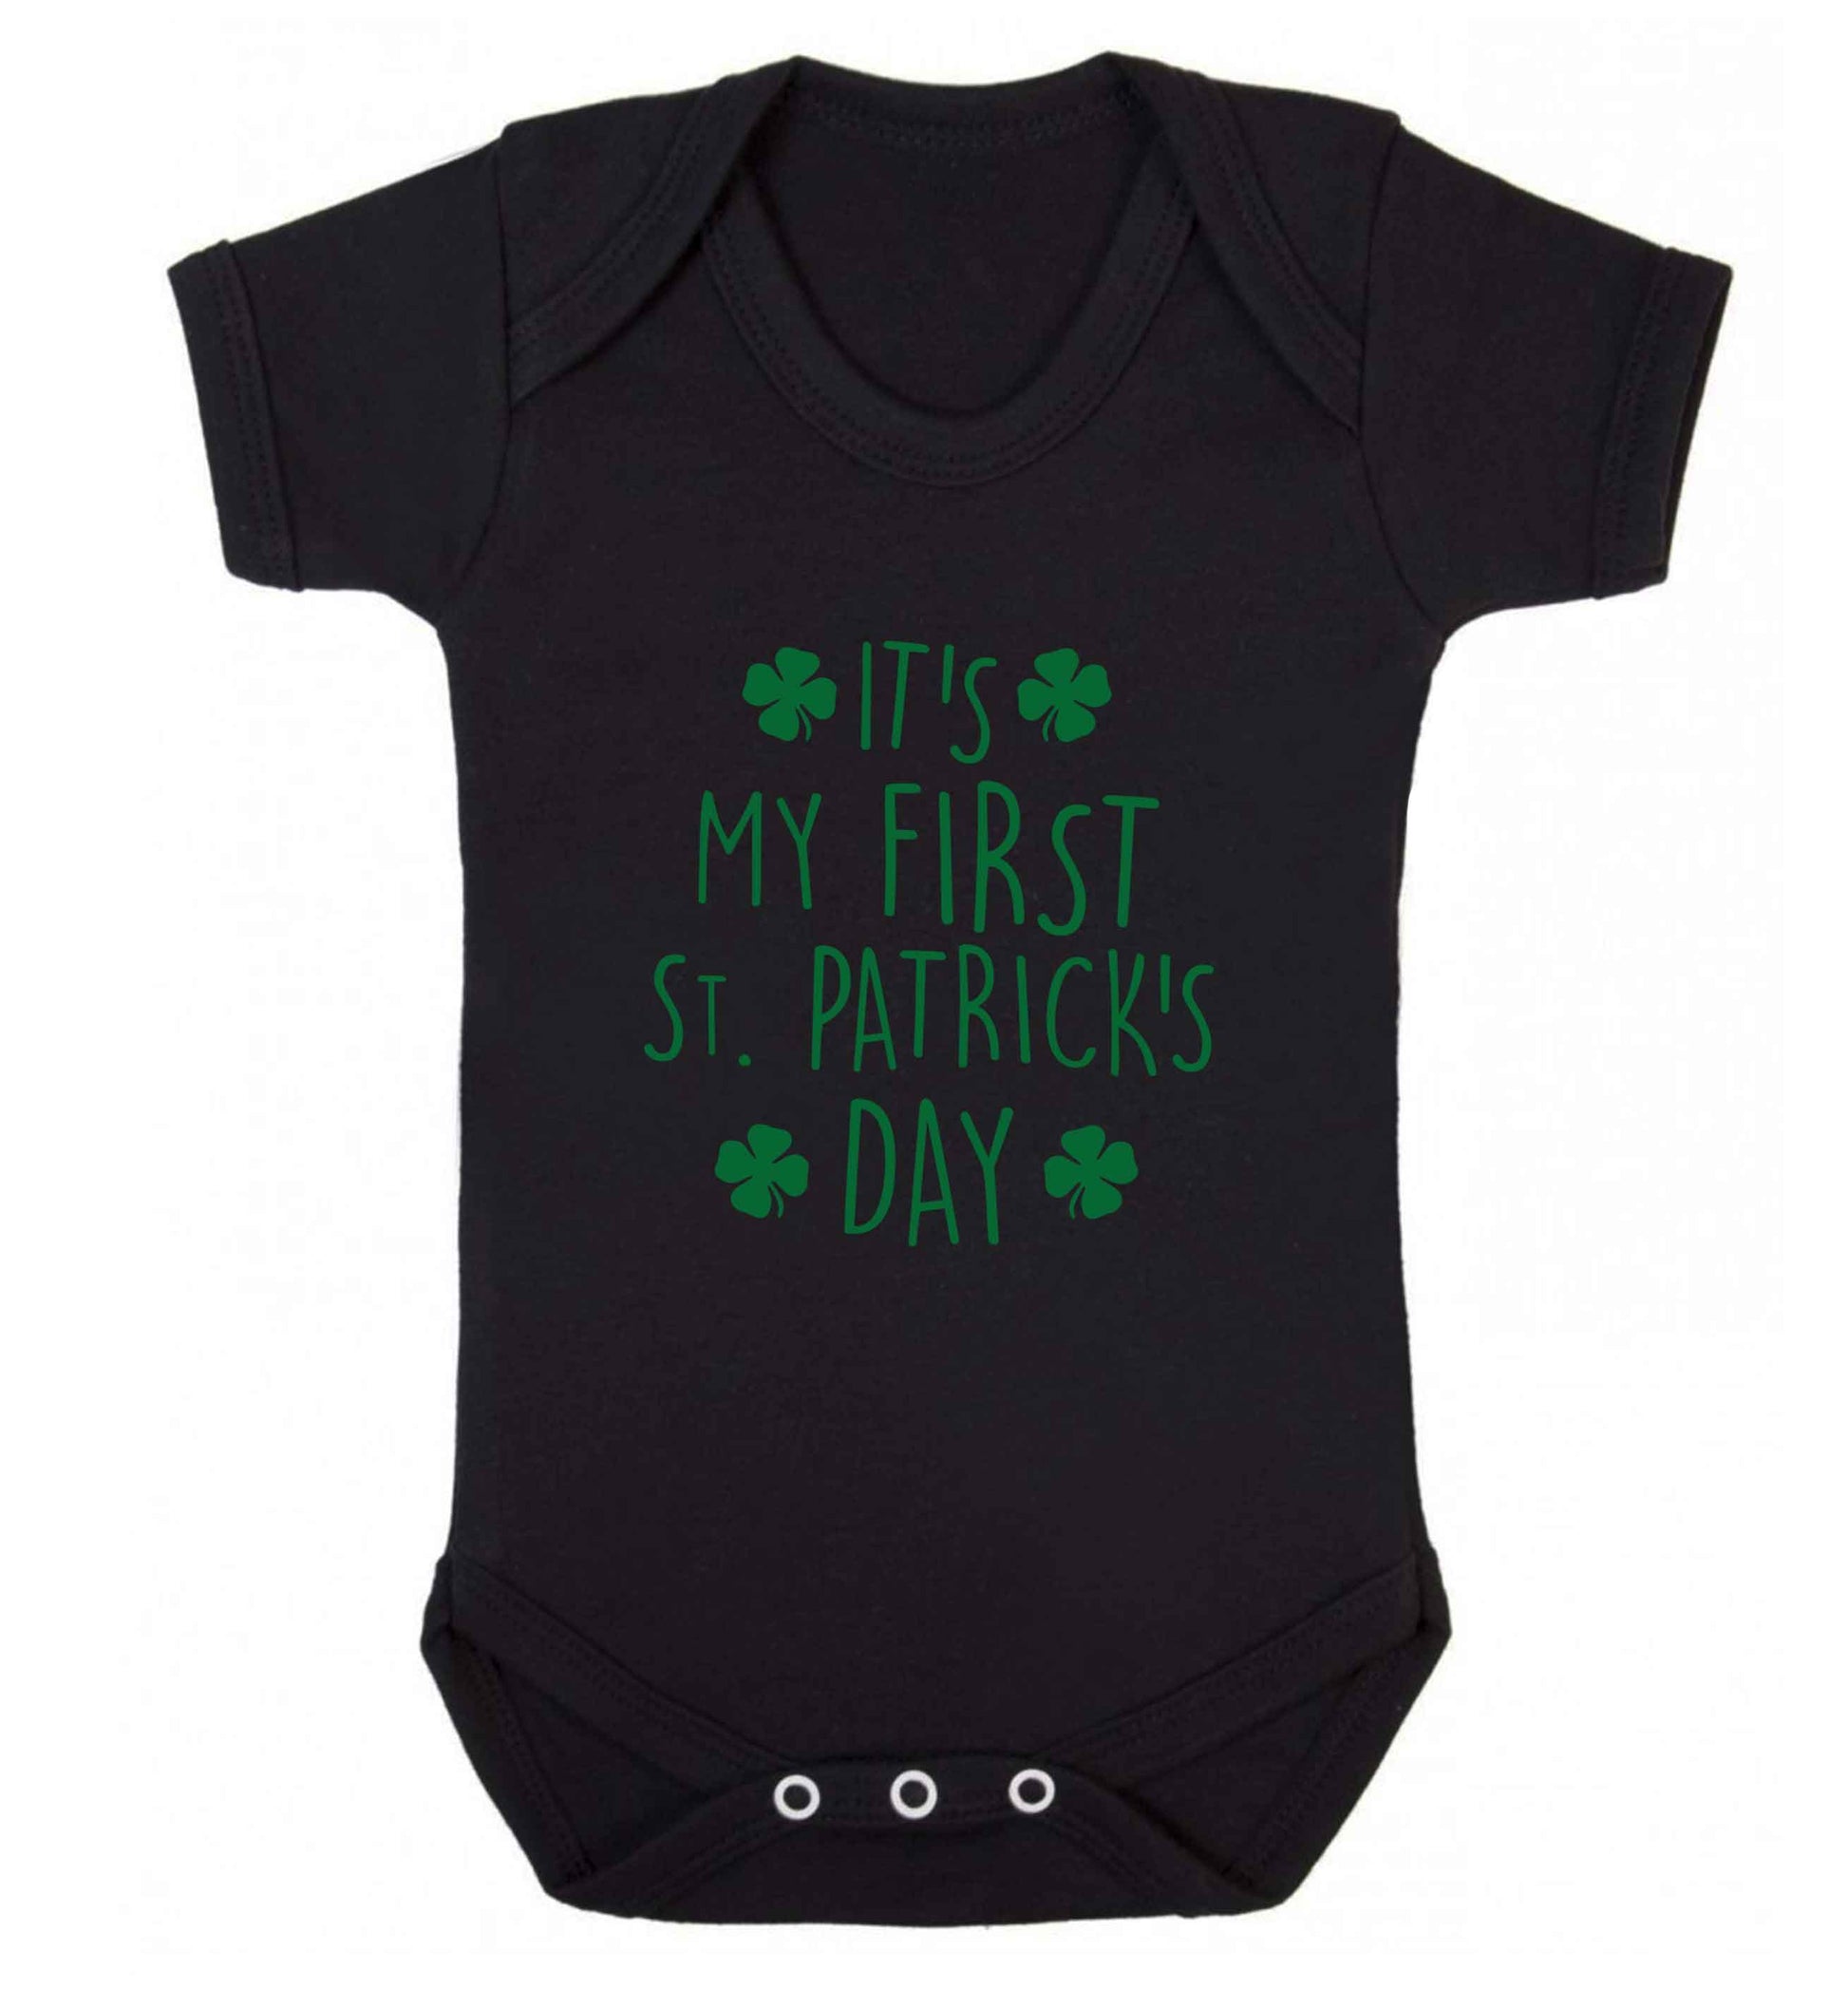 It's my first St.Patrick's day baby vest black 18-24 months